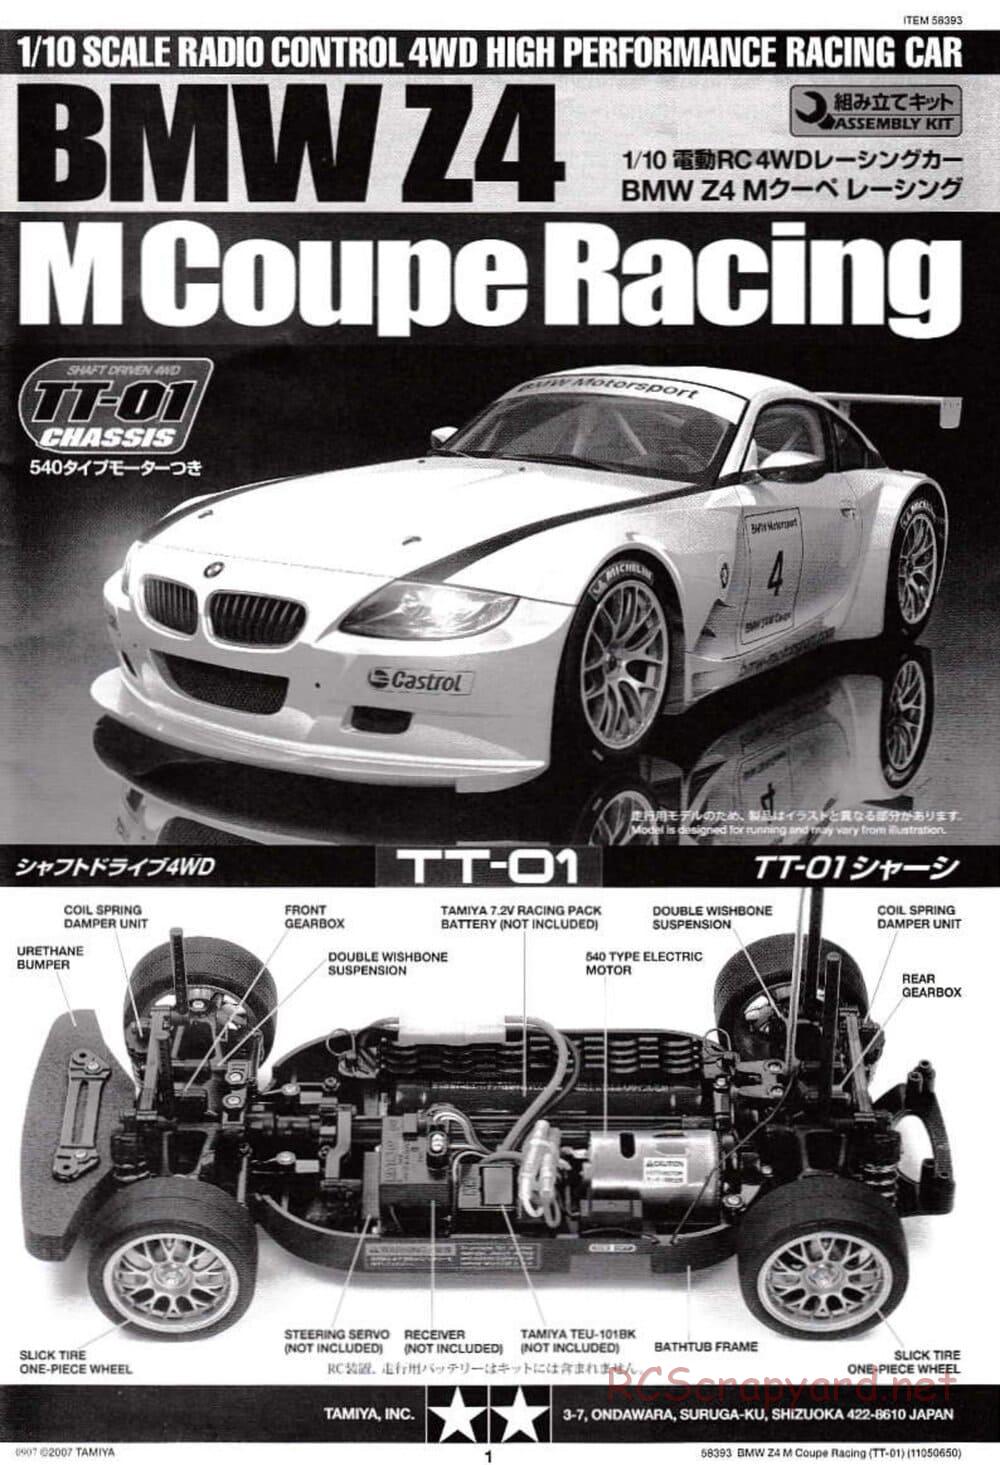 Tamiya - BMW Z4 M Coupe Racing - TT-01 Chassis - Manual - Page 1